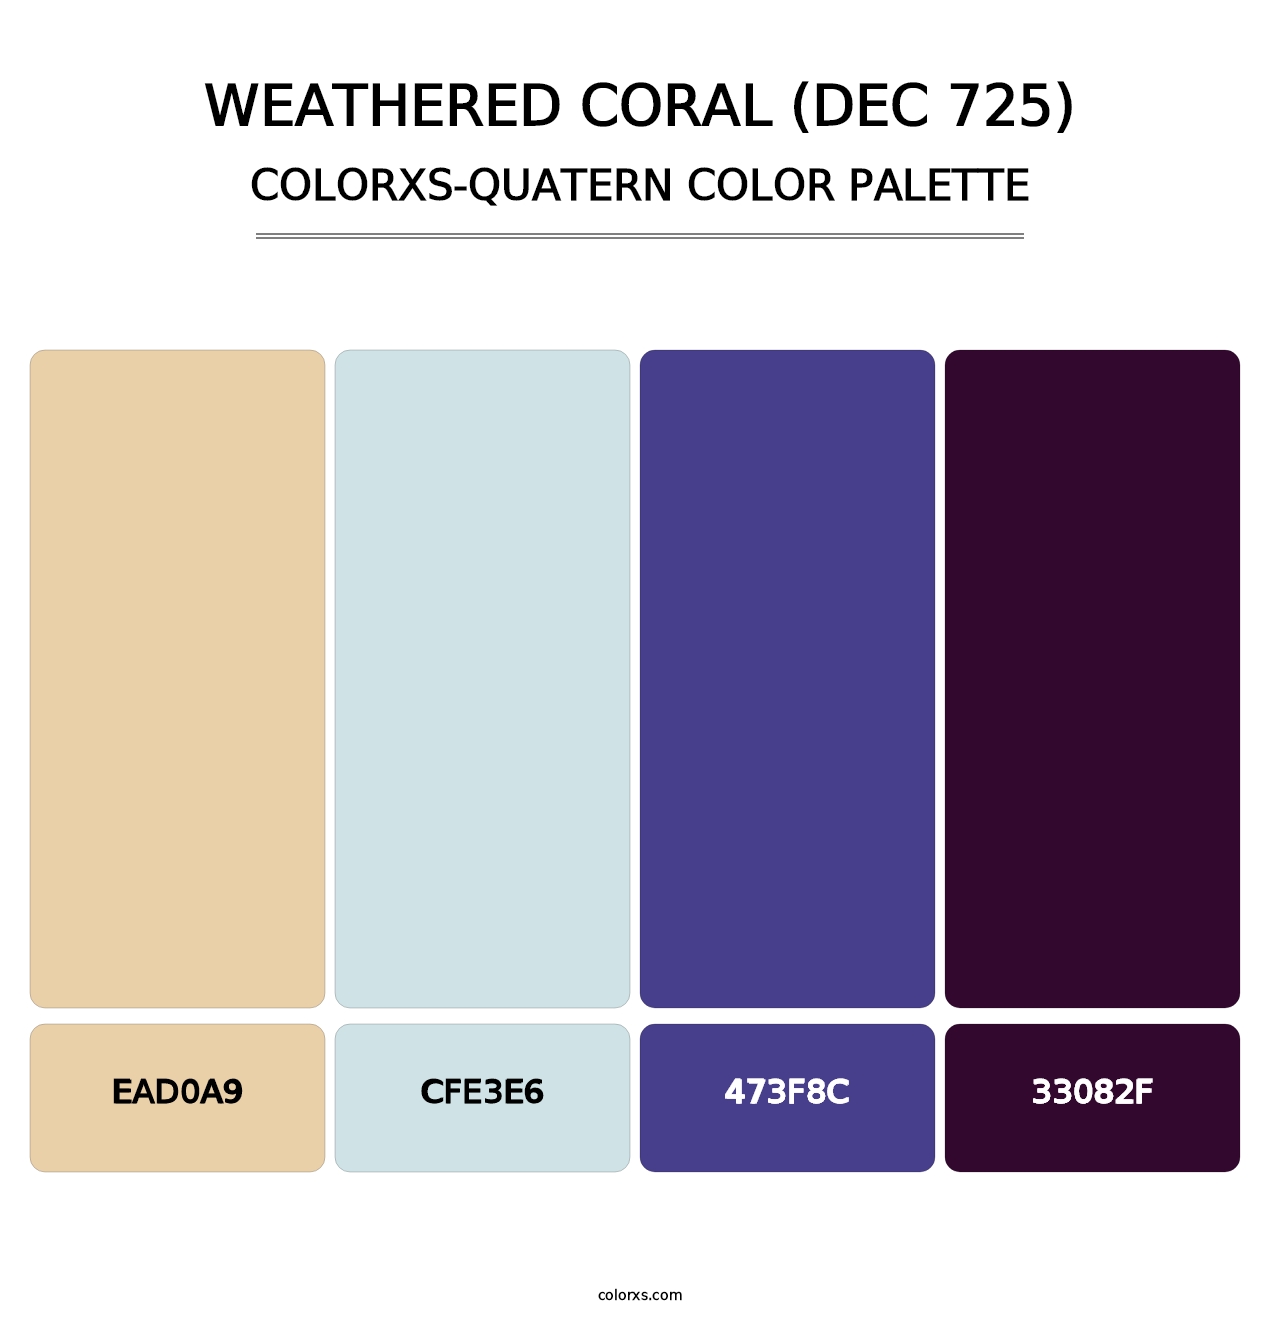 Weathered Coral (DEC 725) - Colorxs Quatern Palette